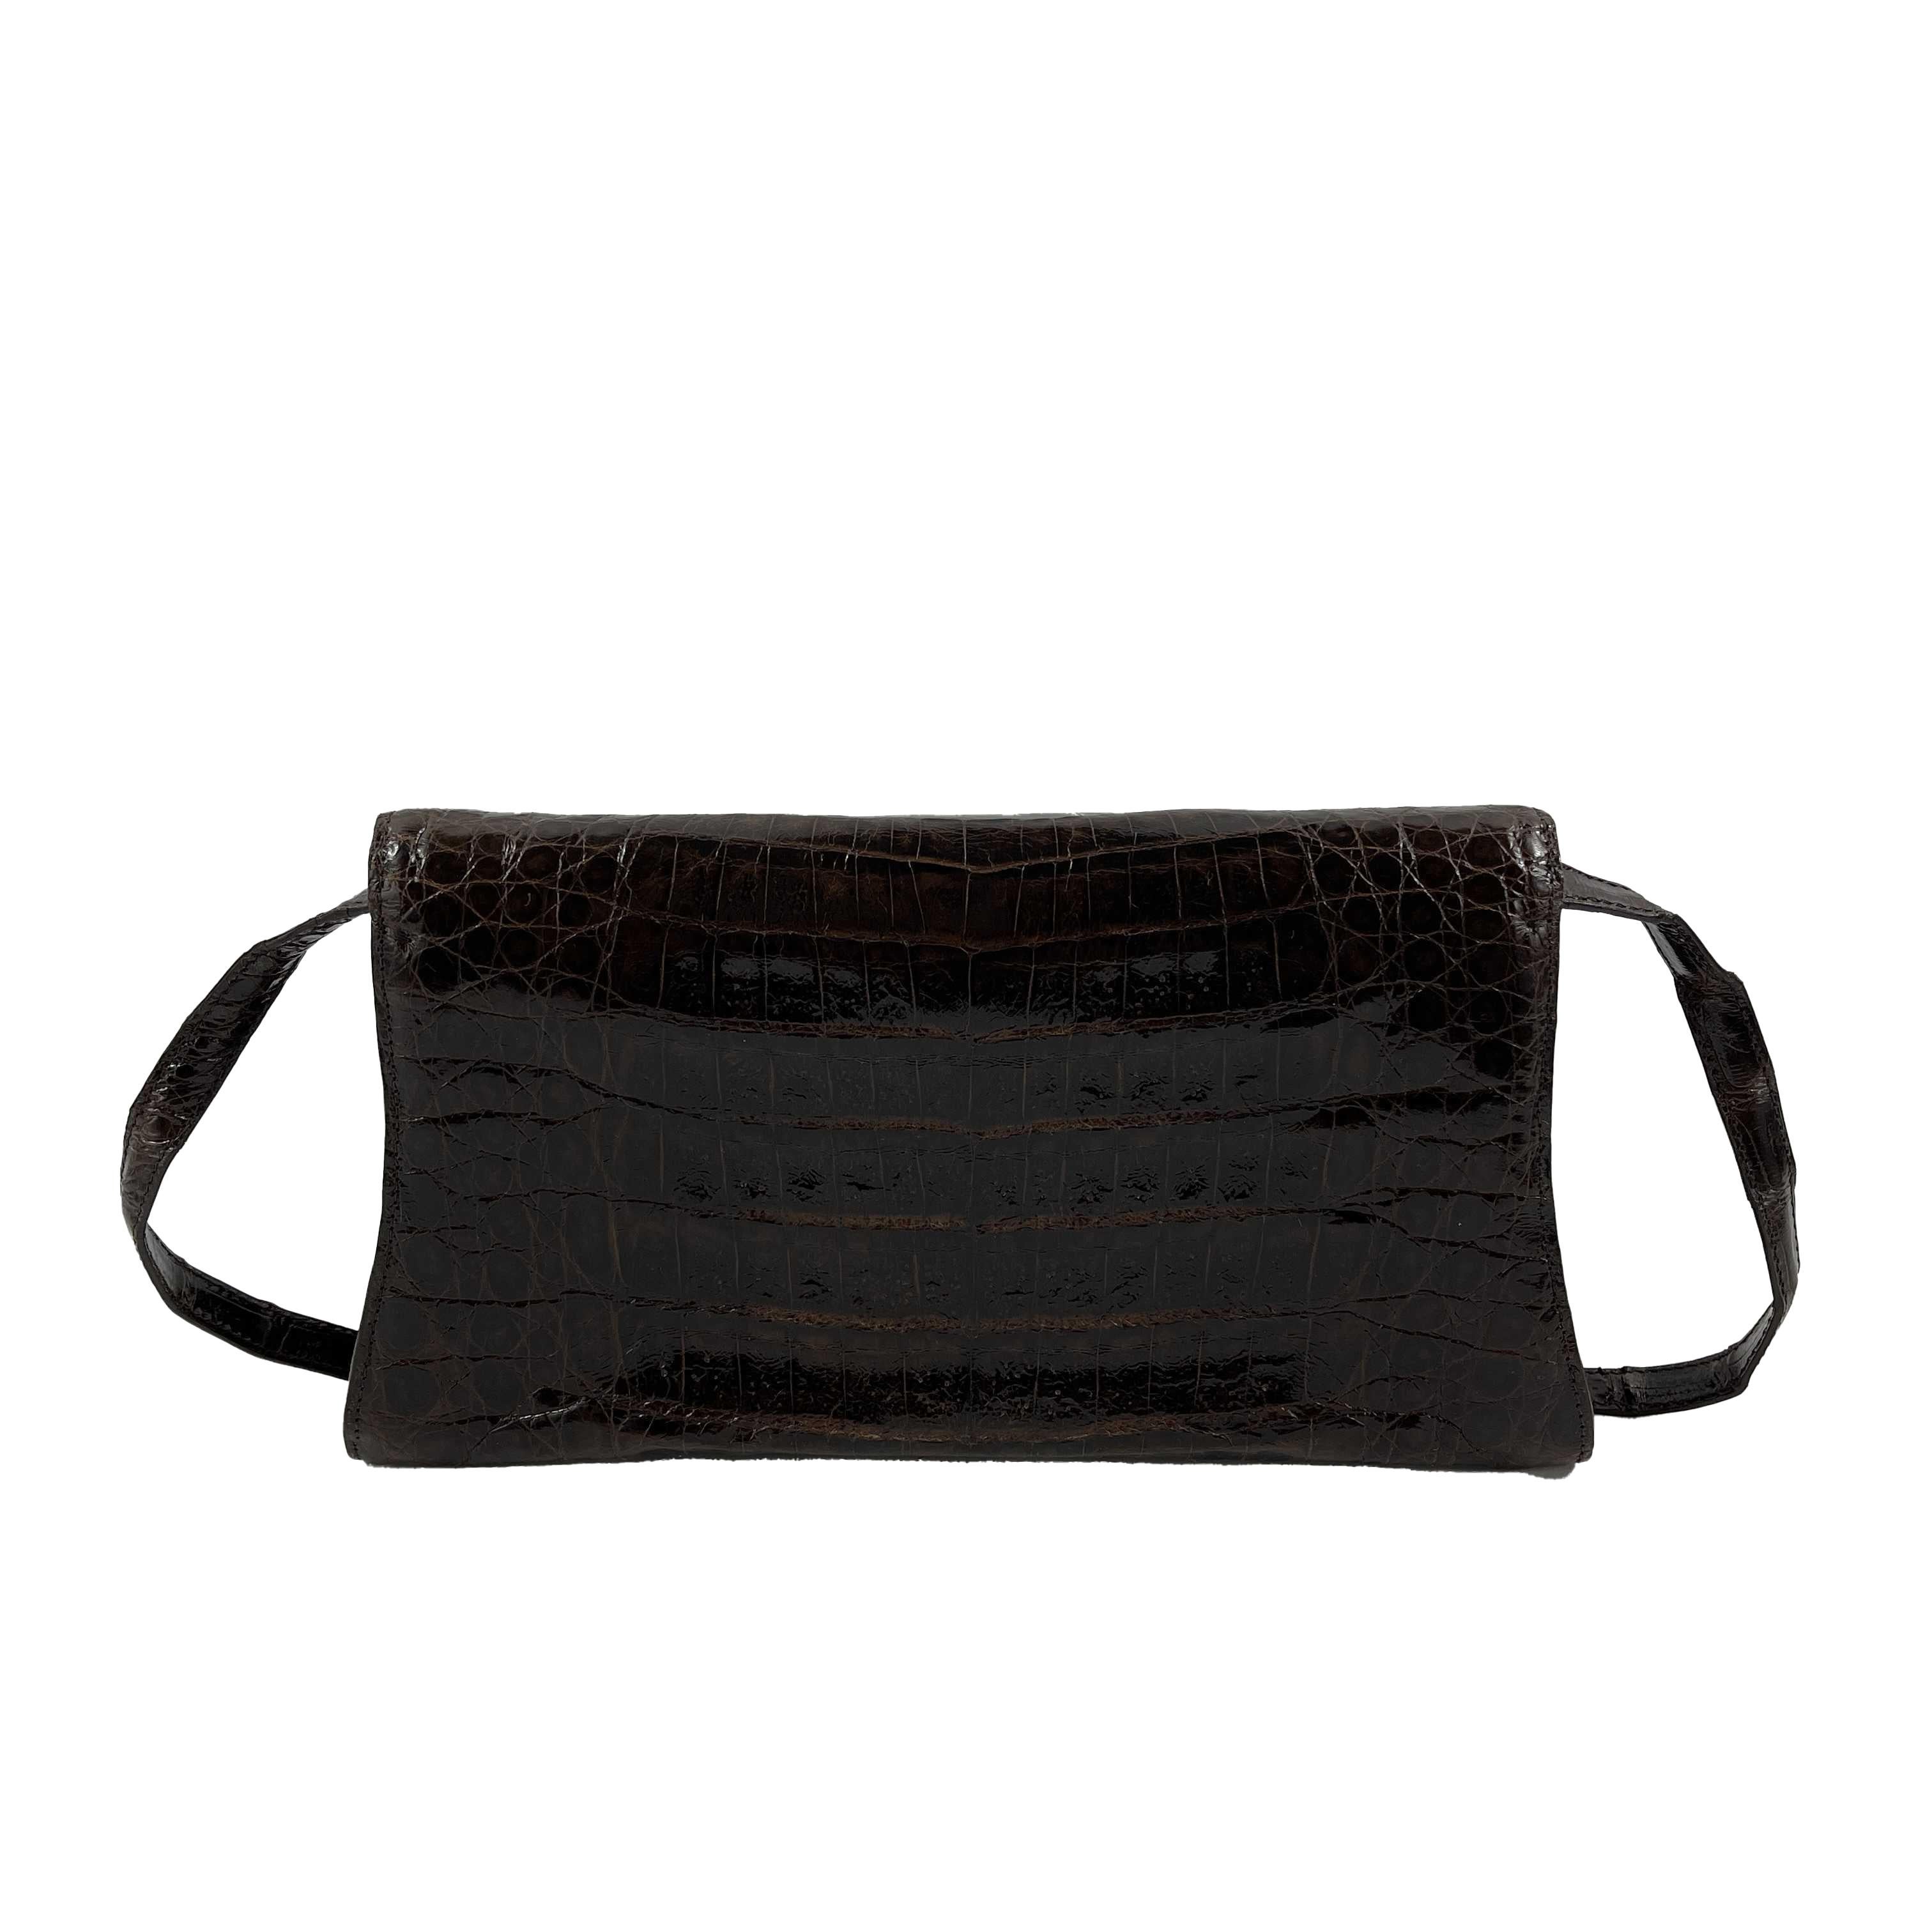 Nancy Gonzalez - Pristine - Small Crocodile Trapezoid Clutch Envelope - Brown - Handbag

Description

This handbag by Nancy Gonzalez is crafted with brown crocodile skin on the exterior and strap.
It features an envelope style flap that opens using